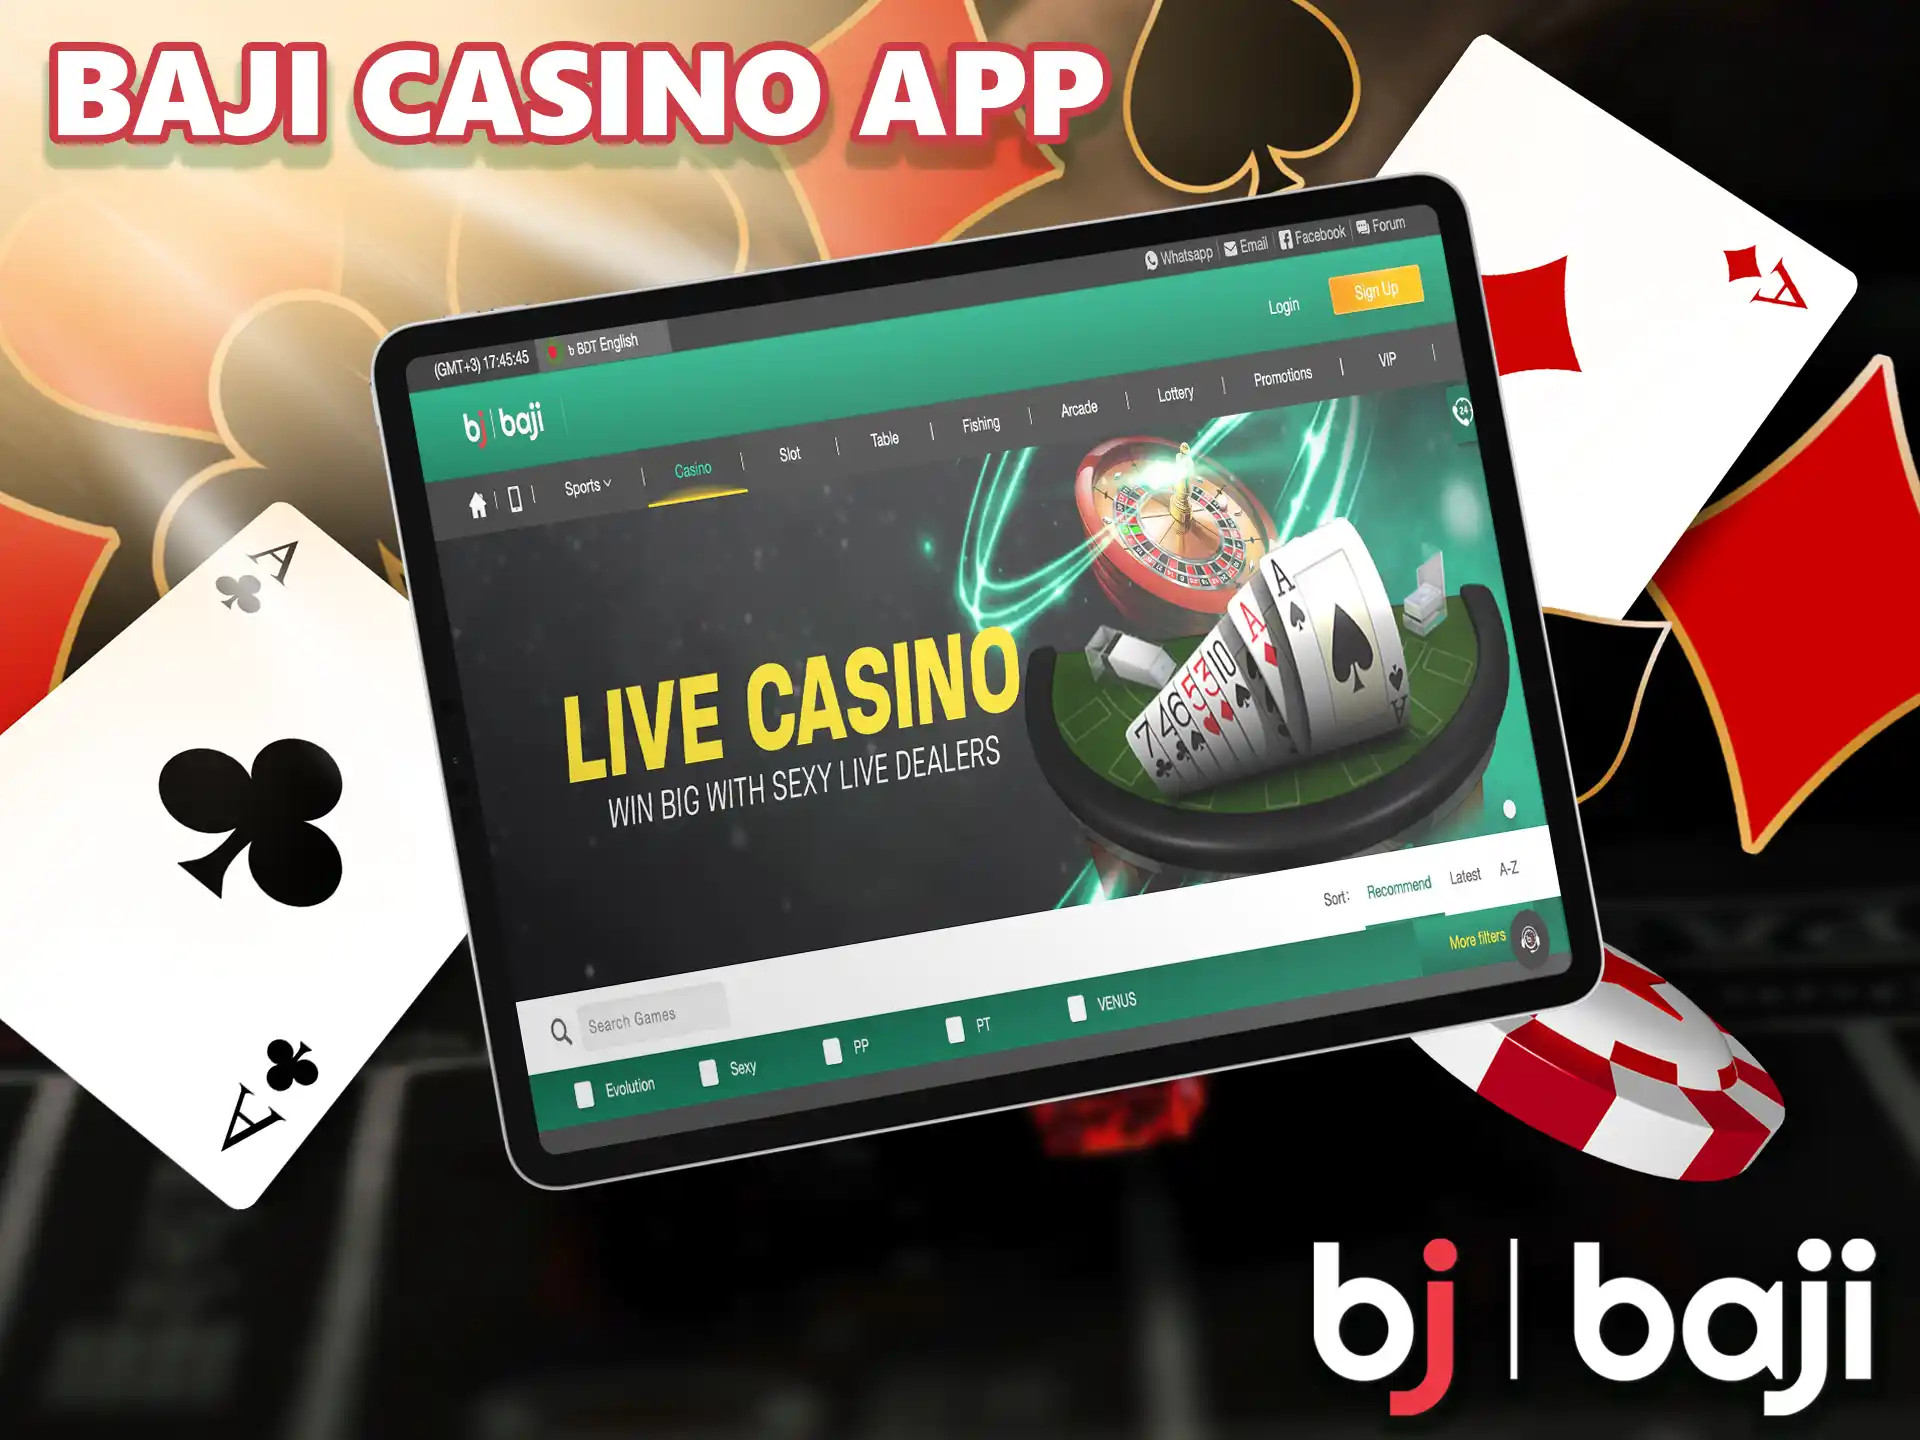 Get access to the gambling section after installing the Baji app on your smartphone.